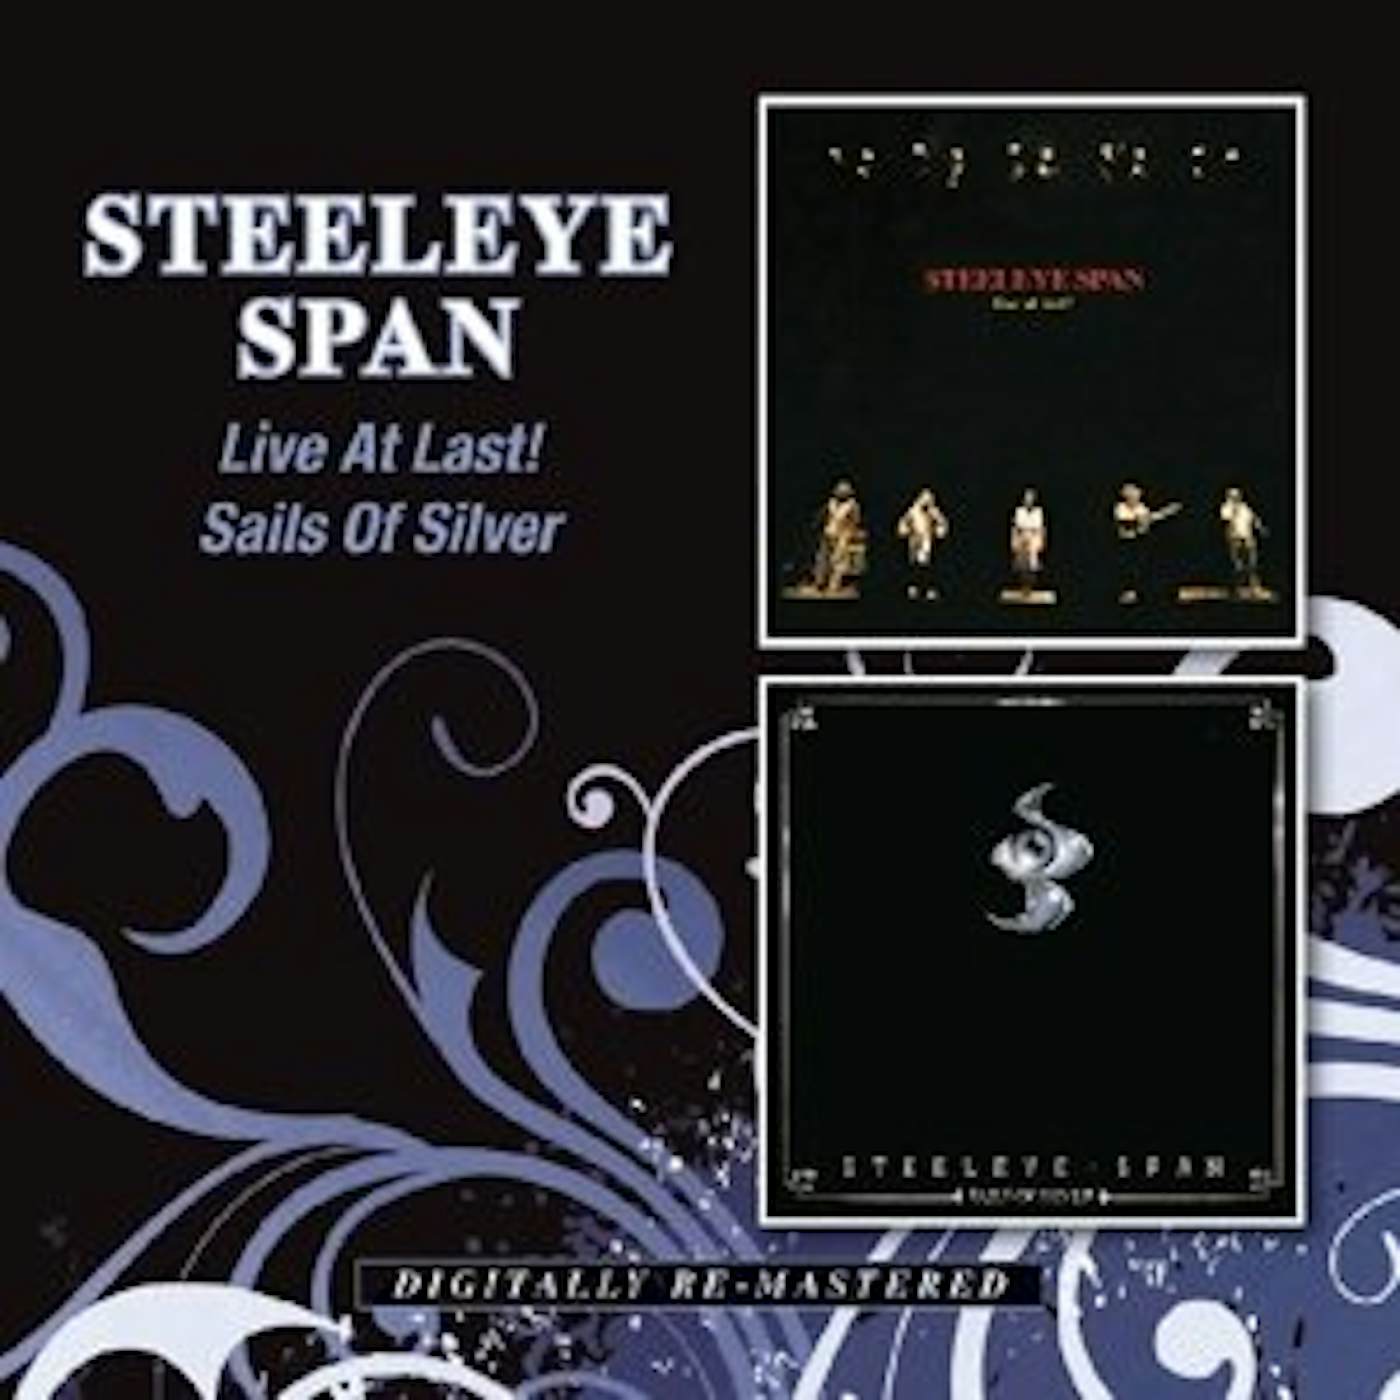 Steeleye Span LIVE AT LAST!/SAILS OF SILVER CD